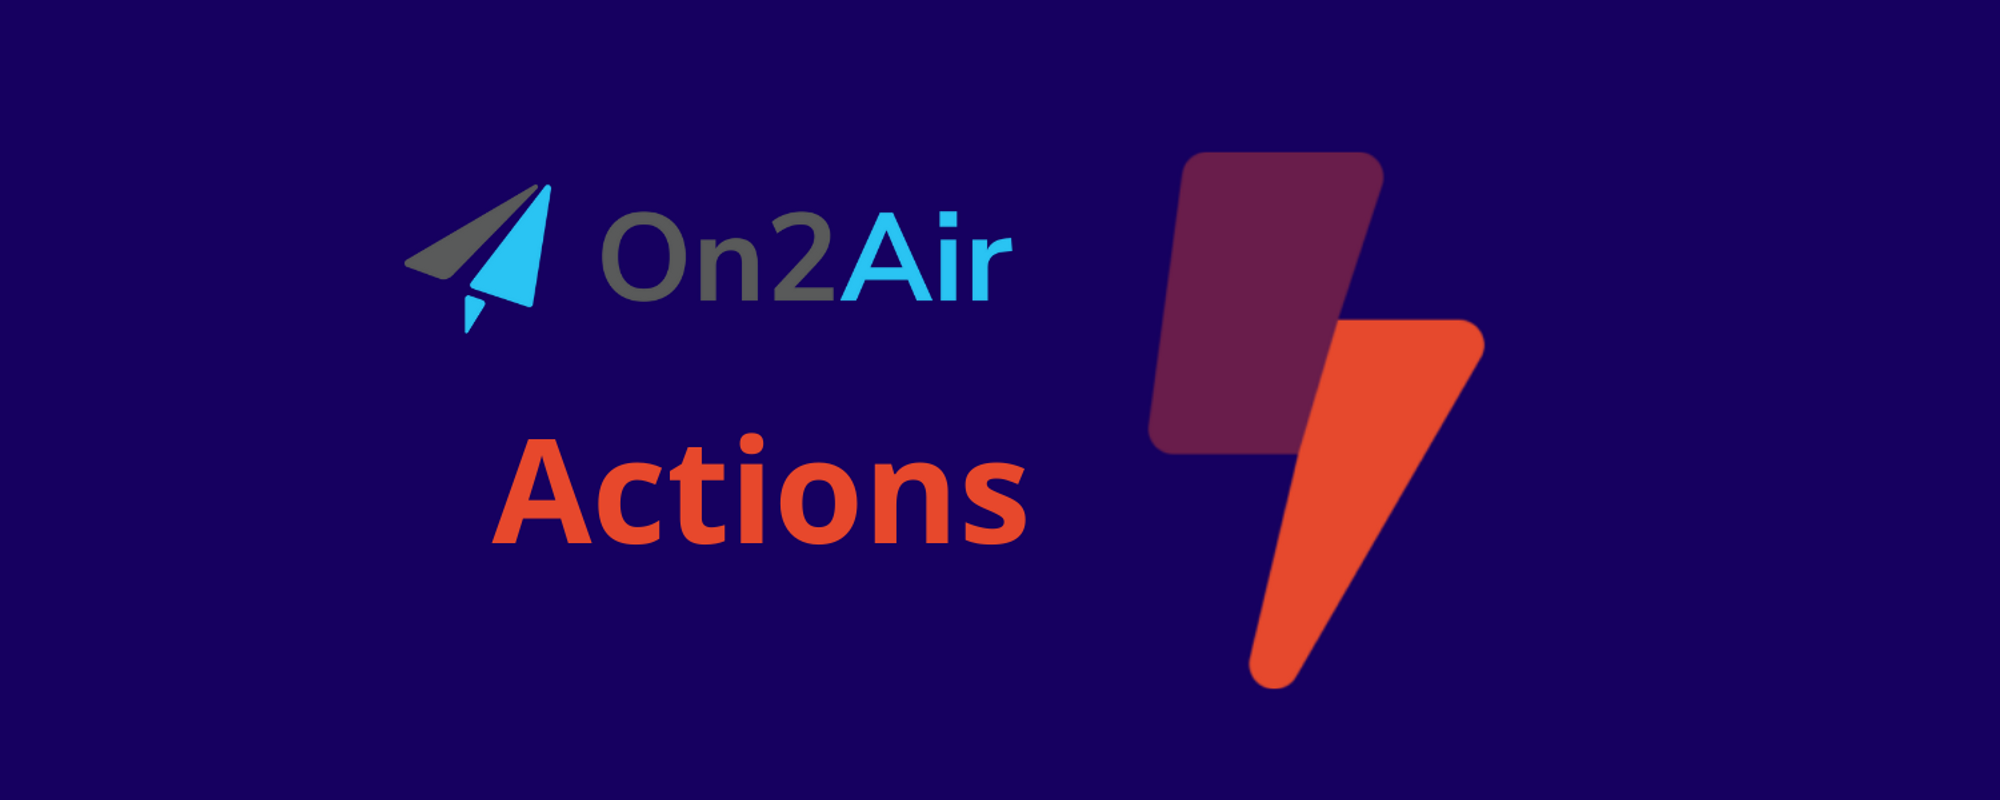 On2Air Actions